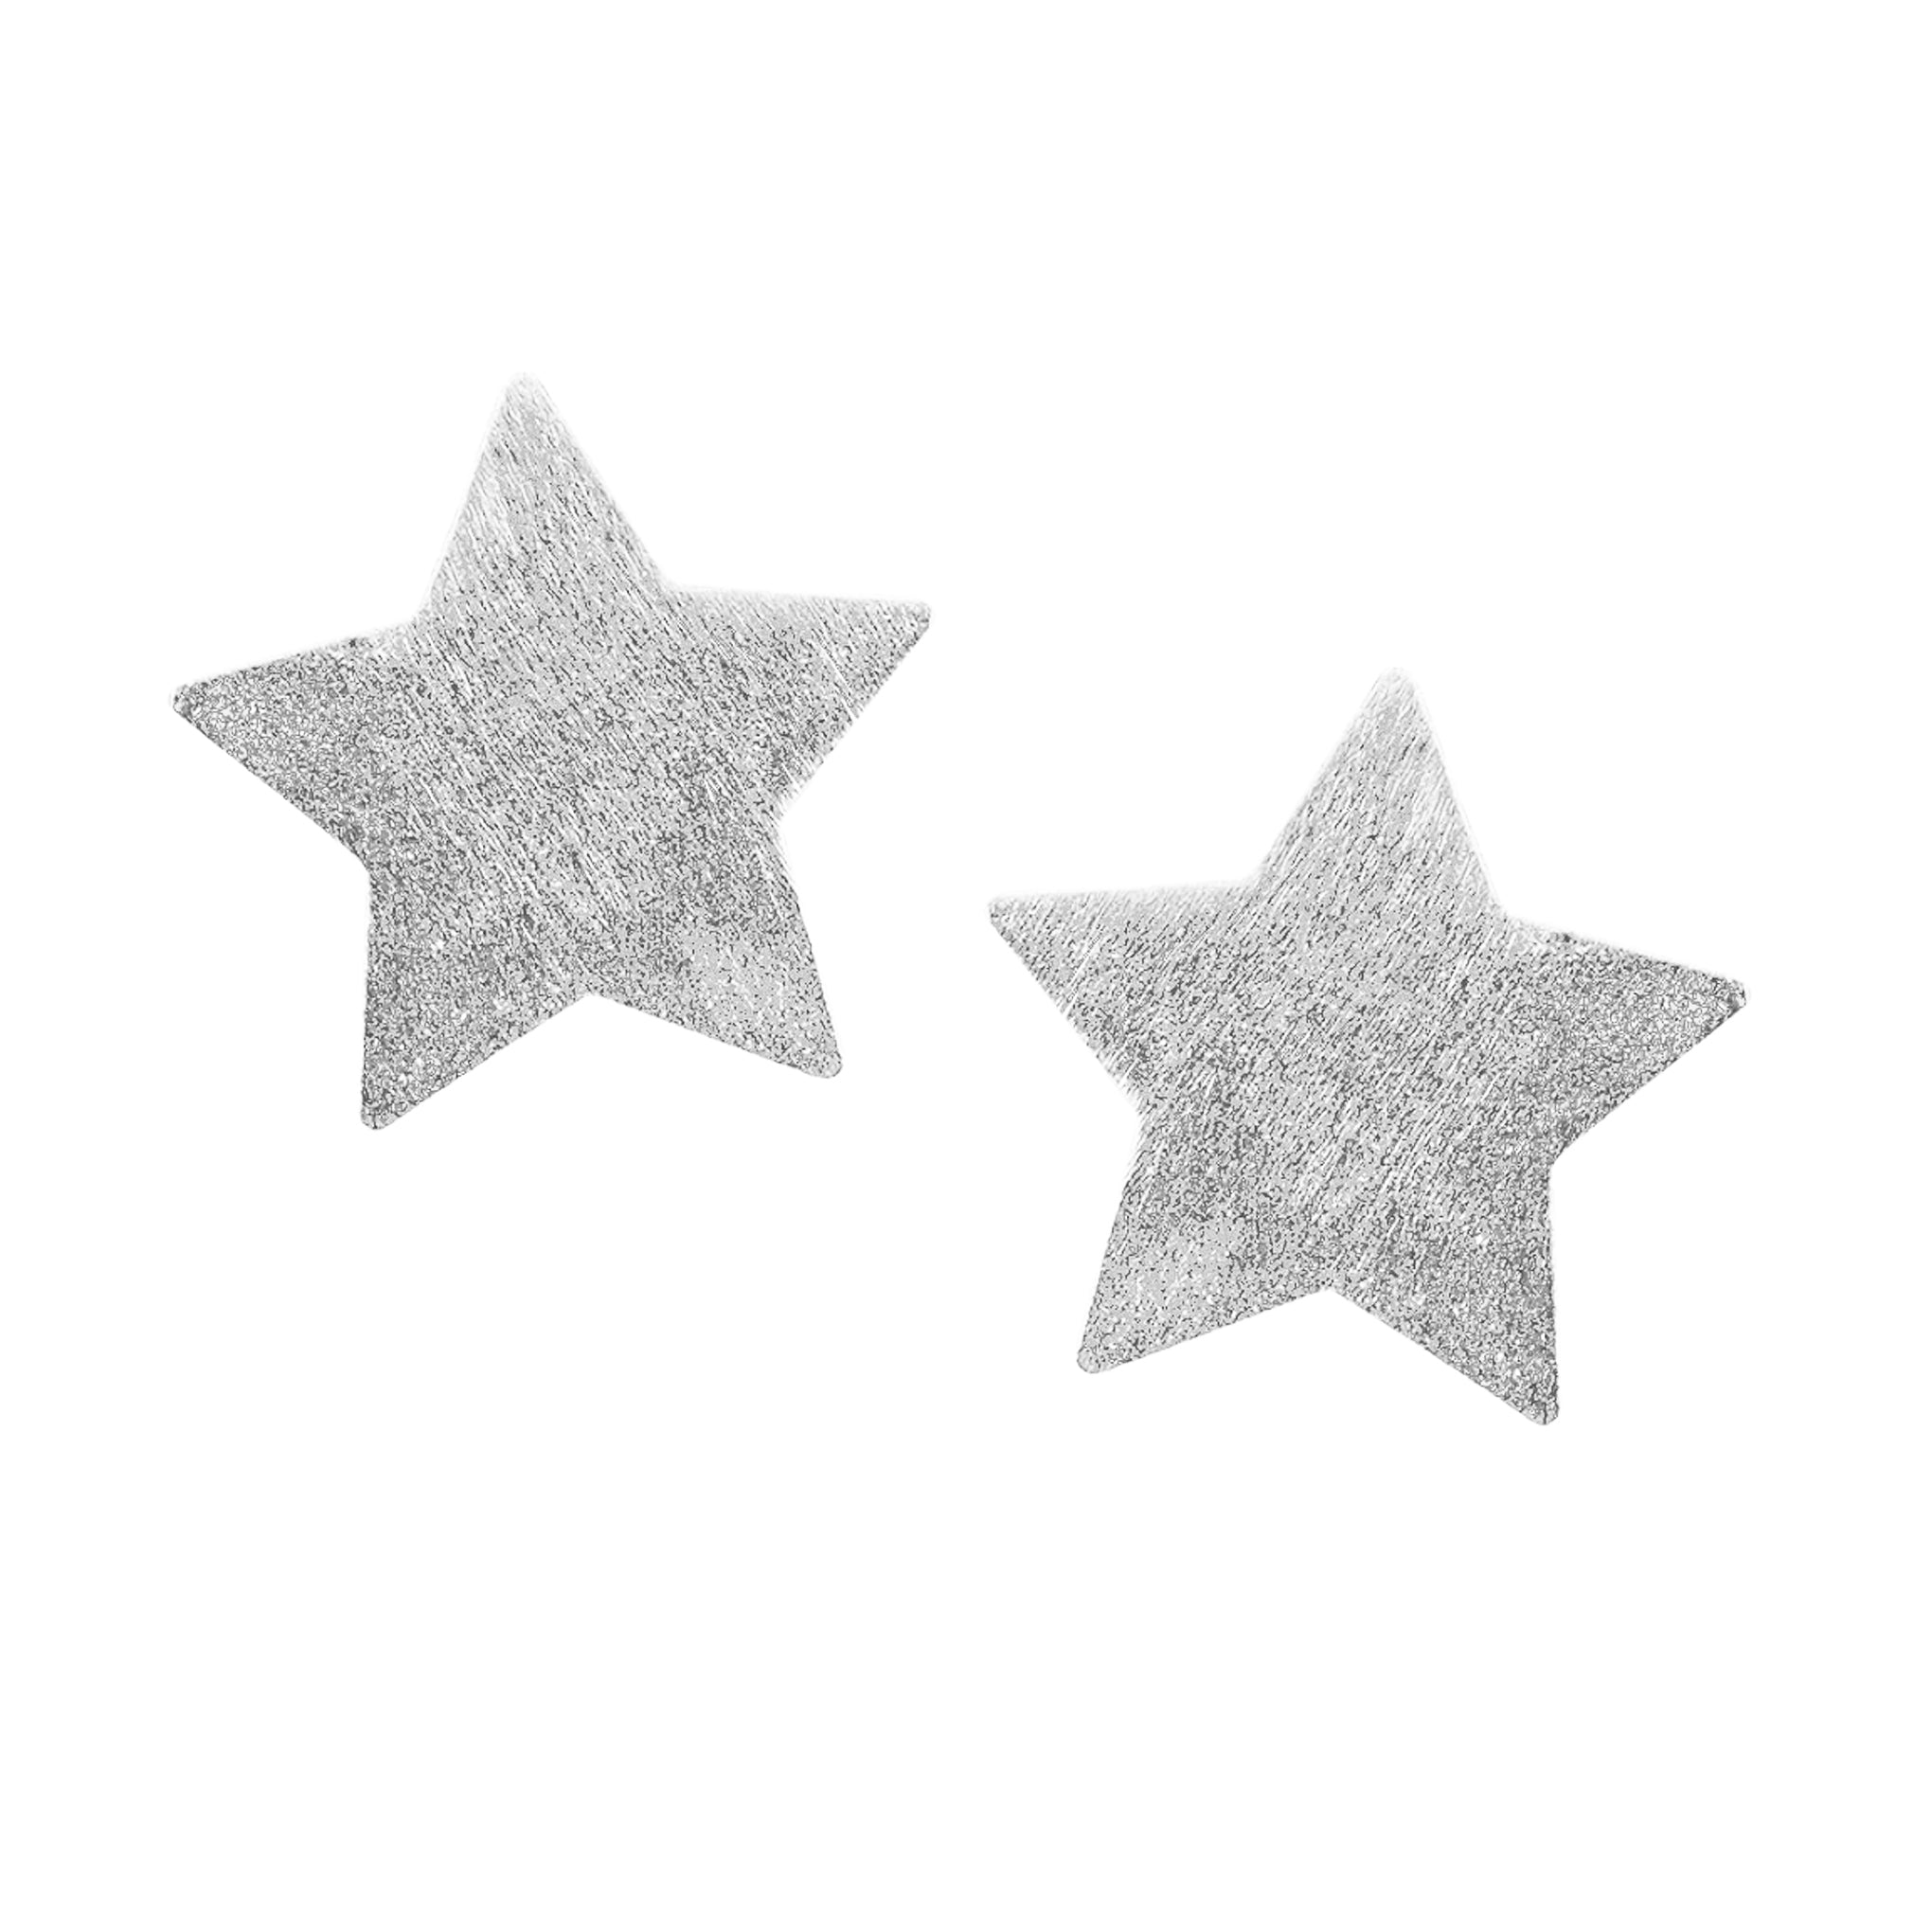 image of Sheila Fajl Lana Star Stud Earrings in Brushed Silver Plated